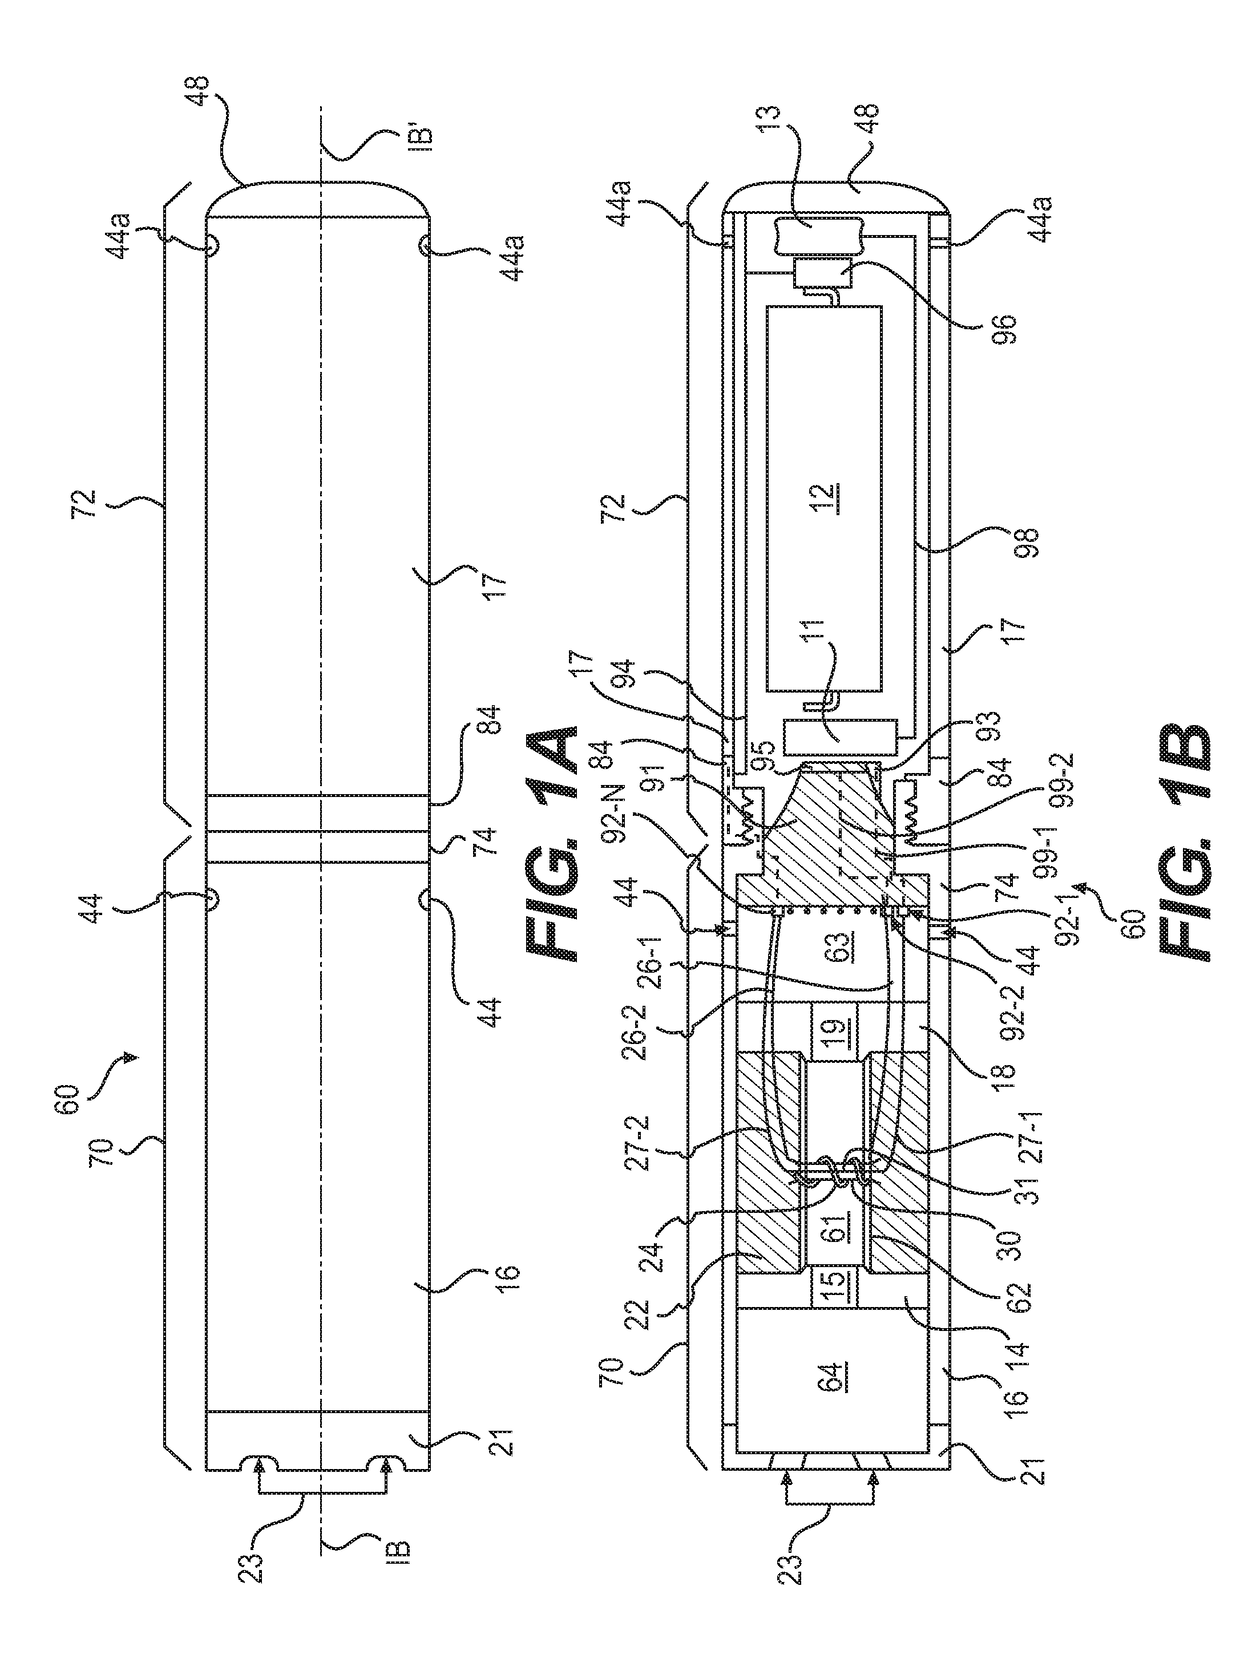 E-vaping device cartridge with internal conductive element